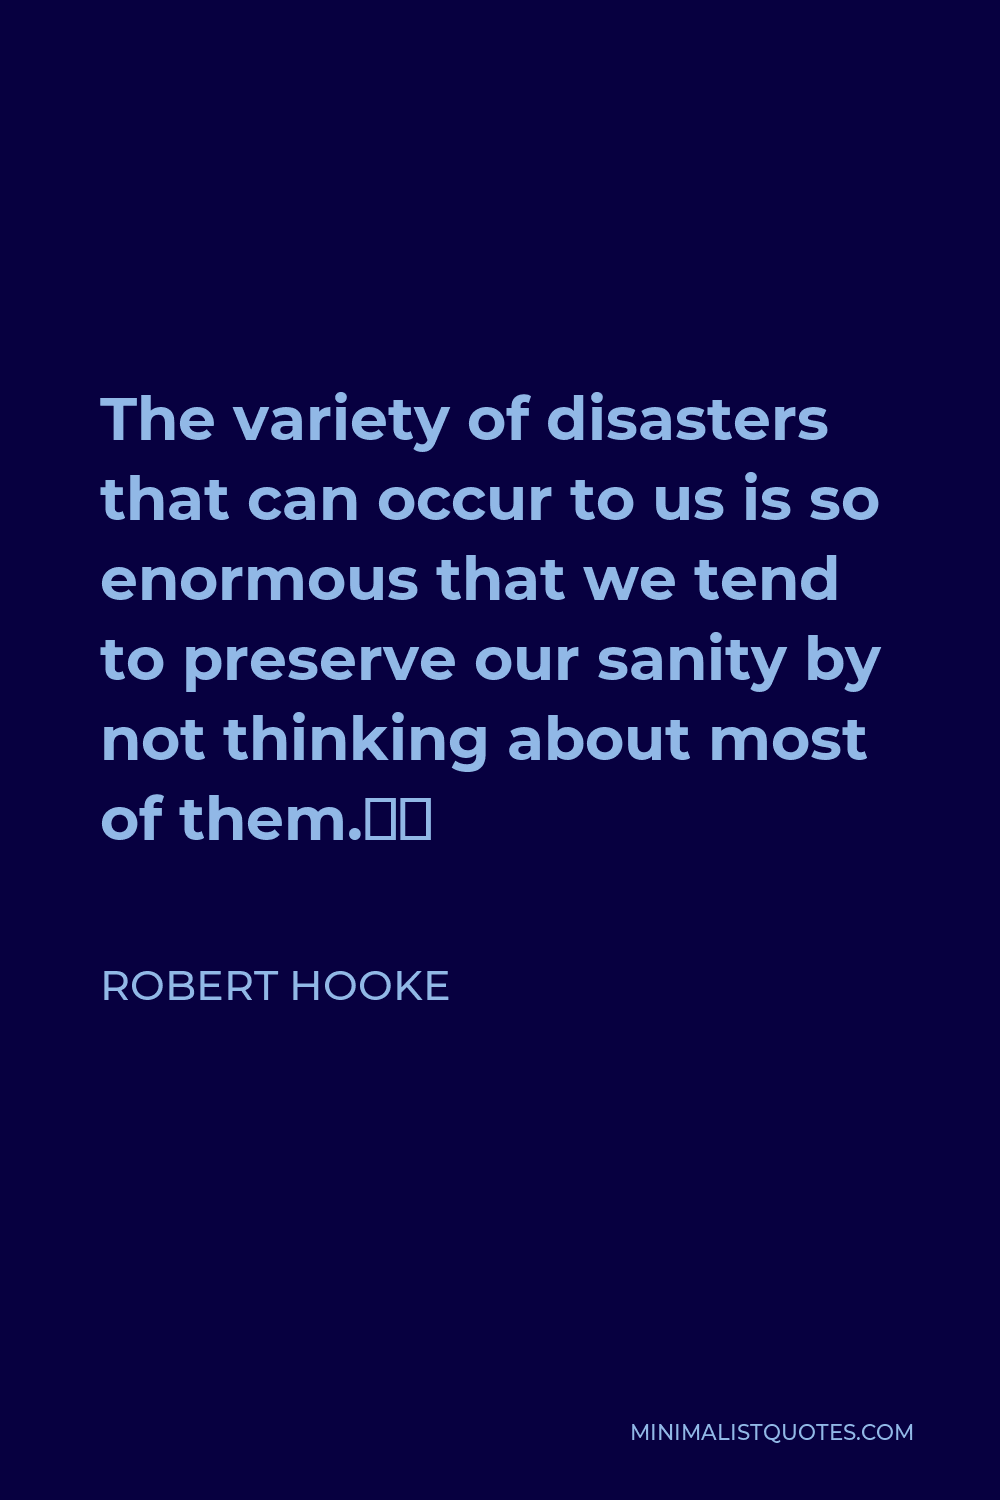 Robert Hooke Quote - The variety of disasters that can occur to us is so enormous that we tend to preserve our sanity by not thinking about most of them.”